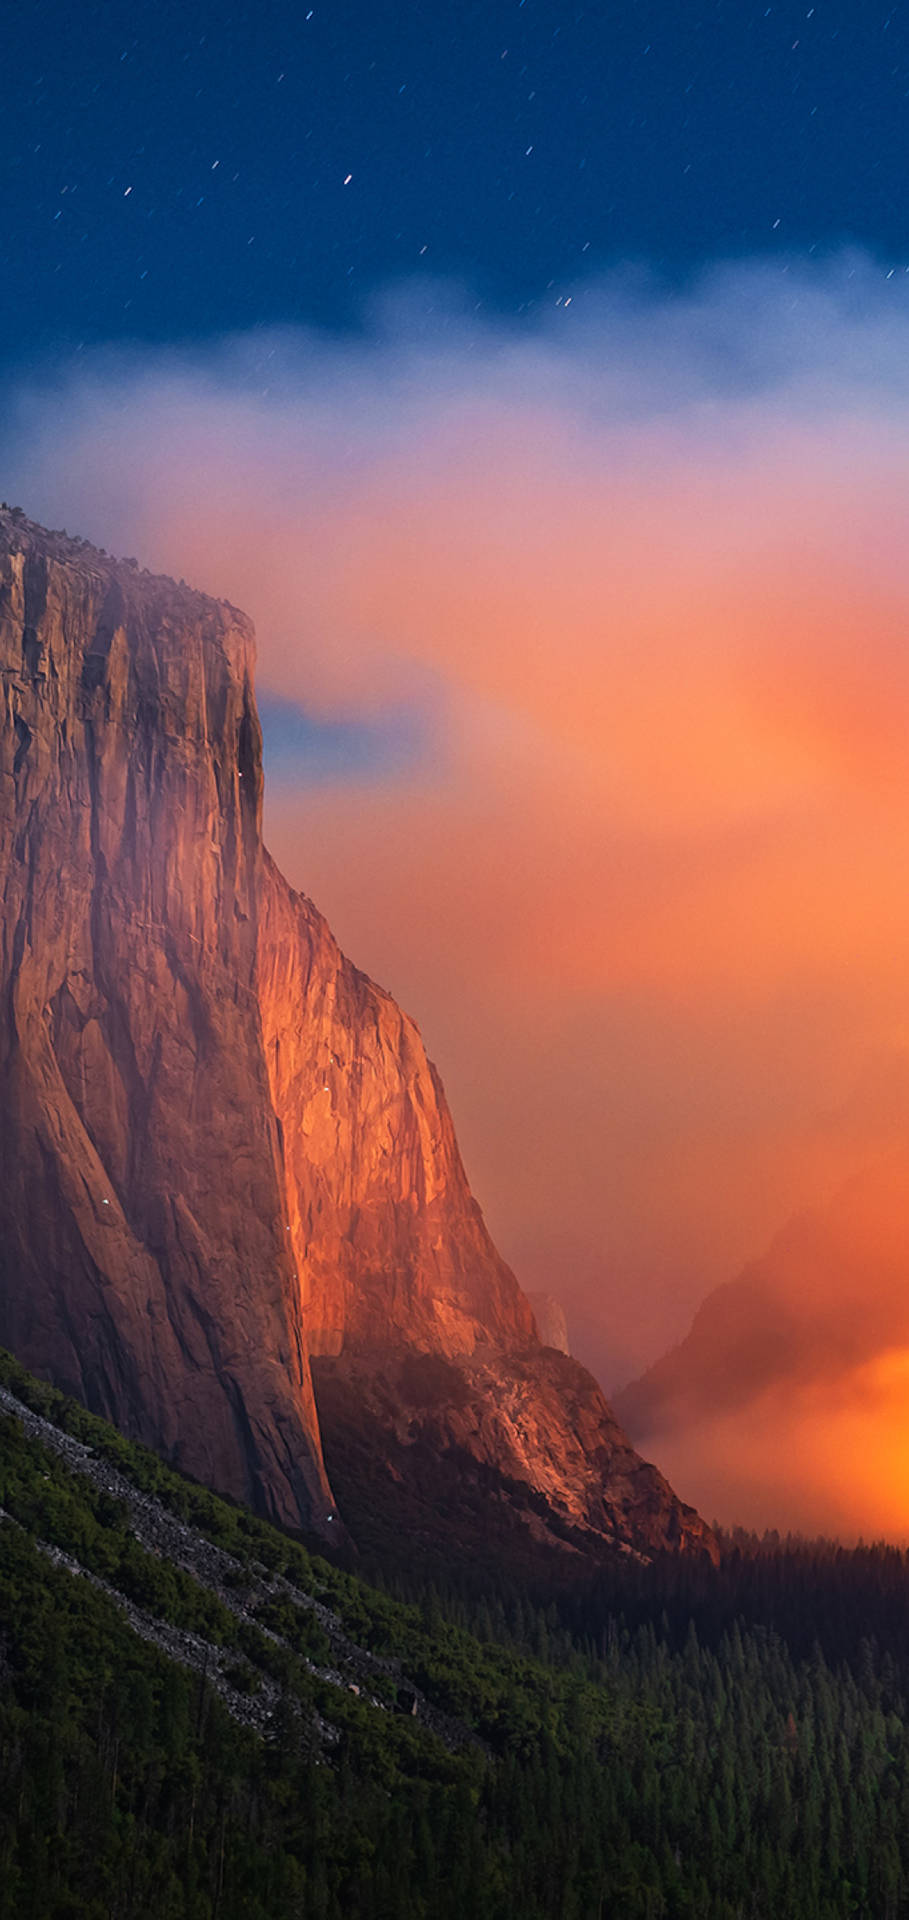 Download Explore the beautiful Yosemite National Park on your iPhone Wallpaper